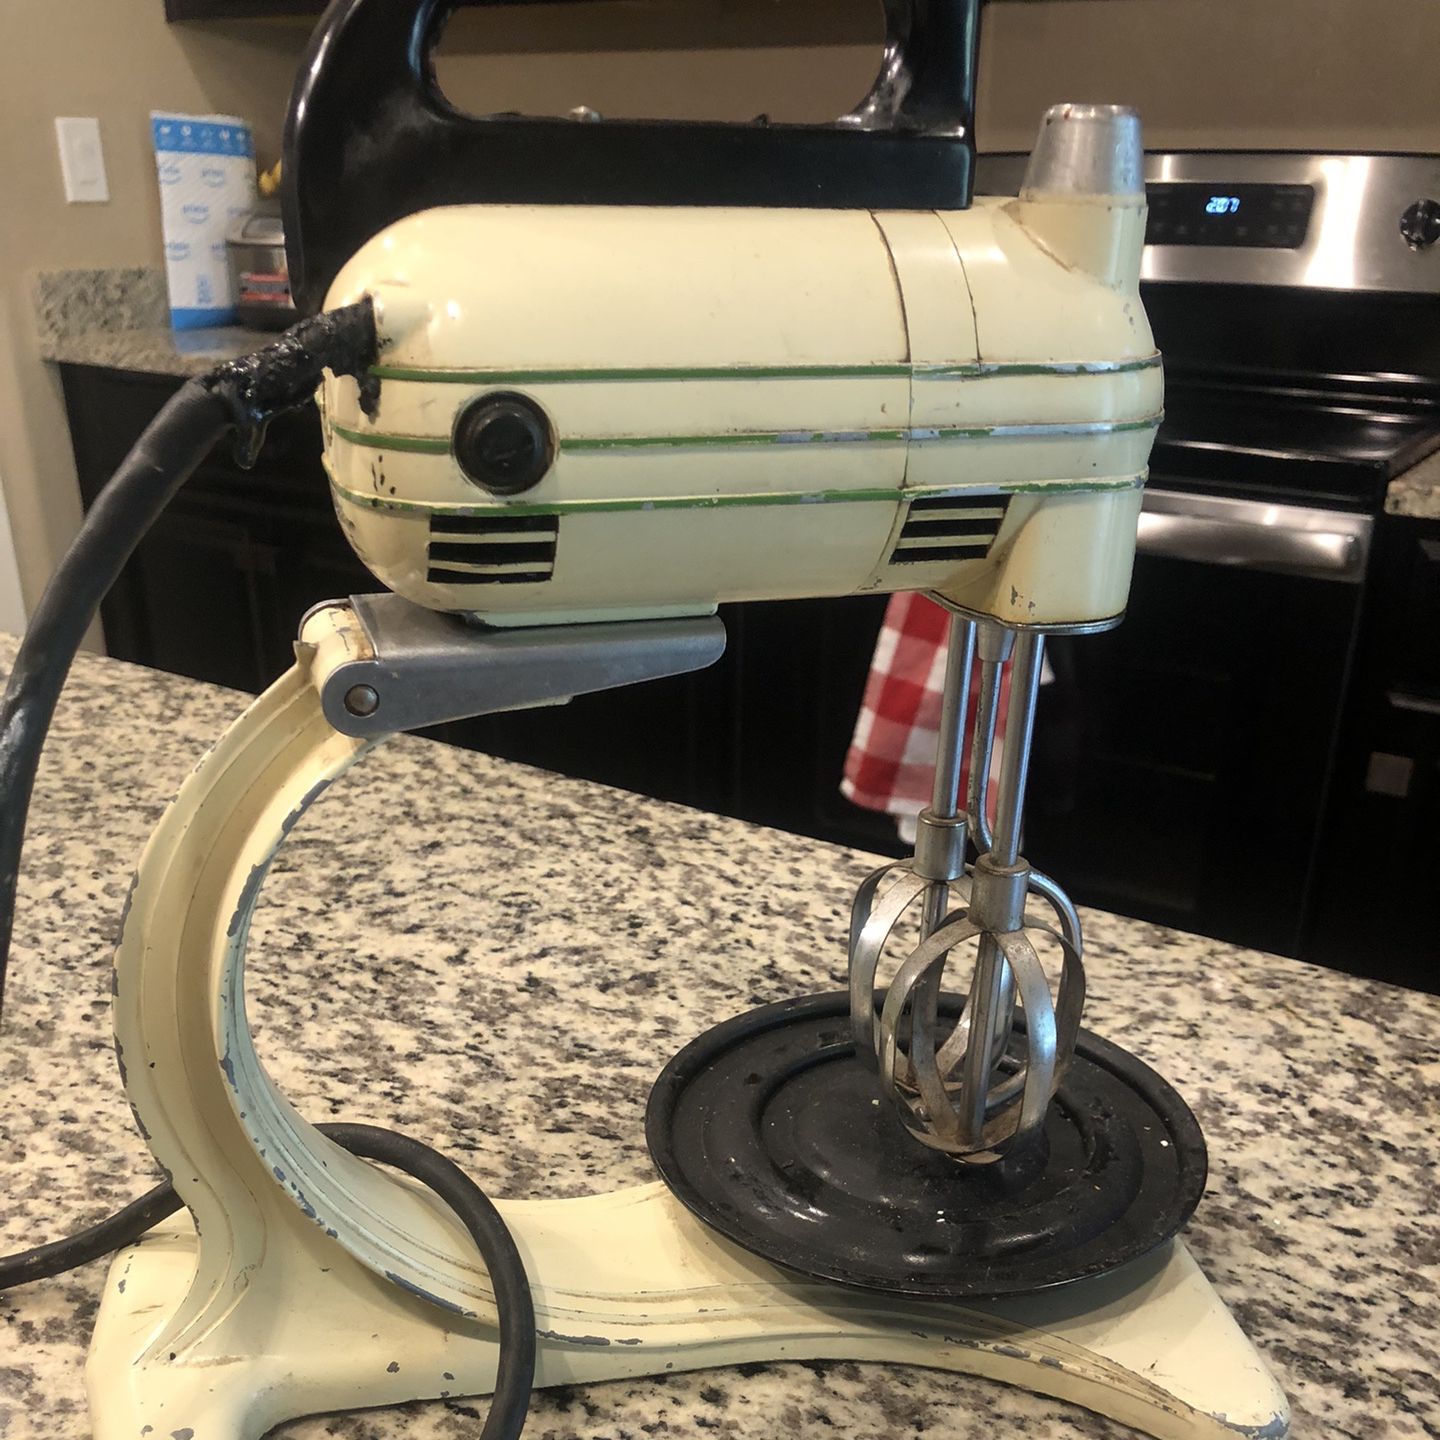 New In Box Detachable Hand Stand Mixer By GE for Sale in Las Vegas, NV -  OfferUp